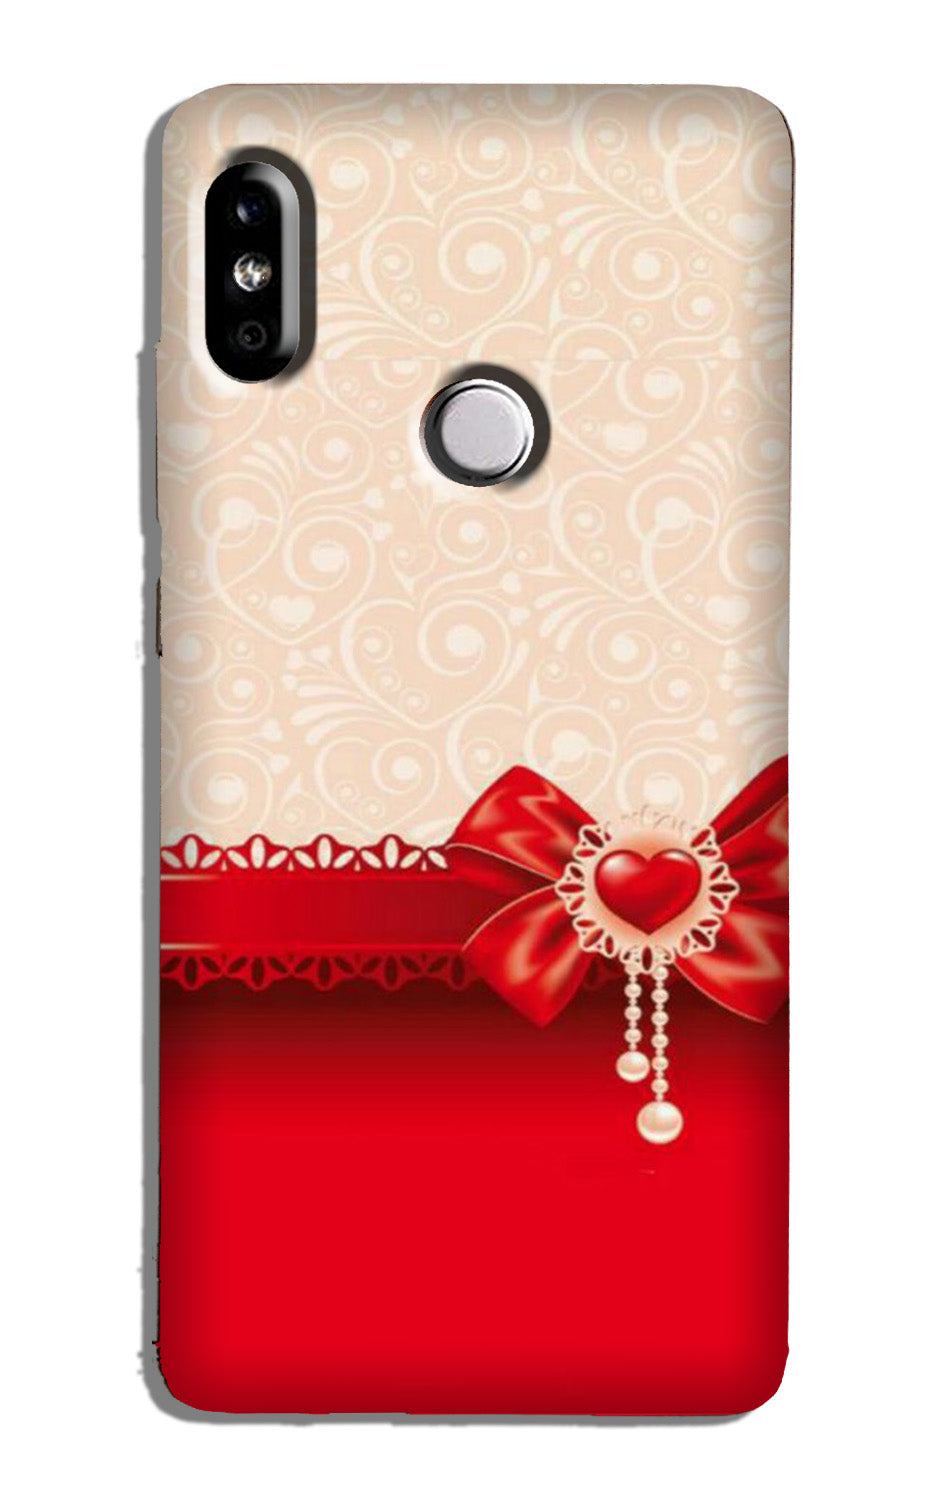 Gift Wrap3 Case for Redmi Note 6 Pro